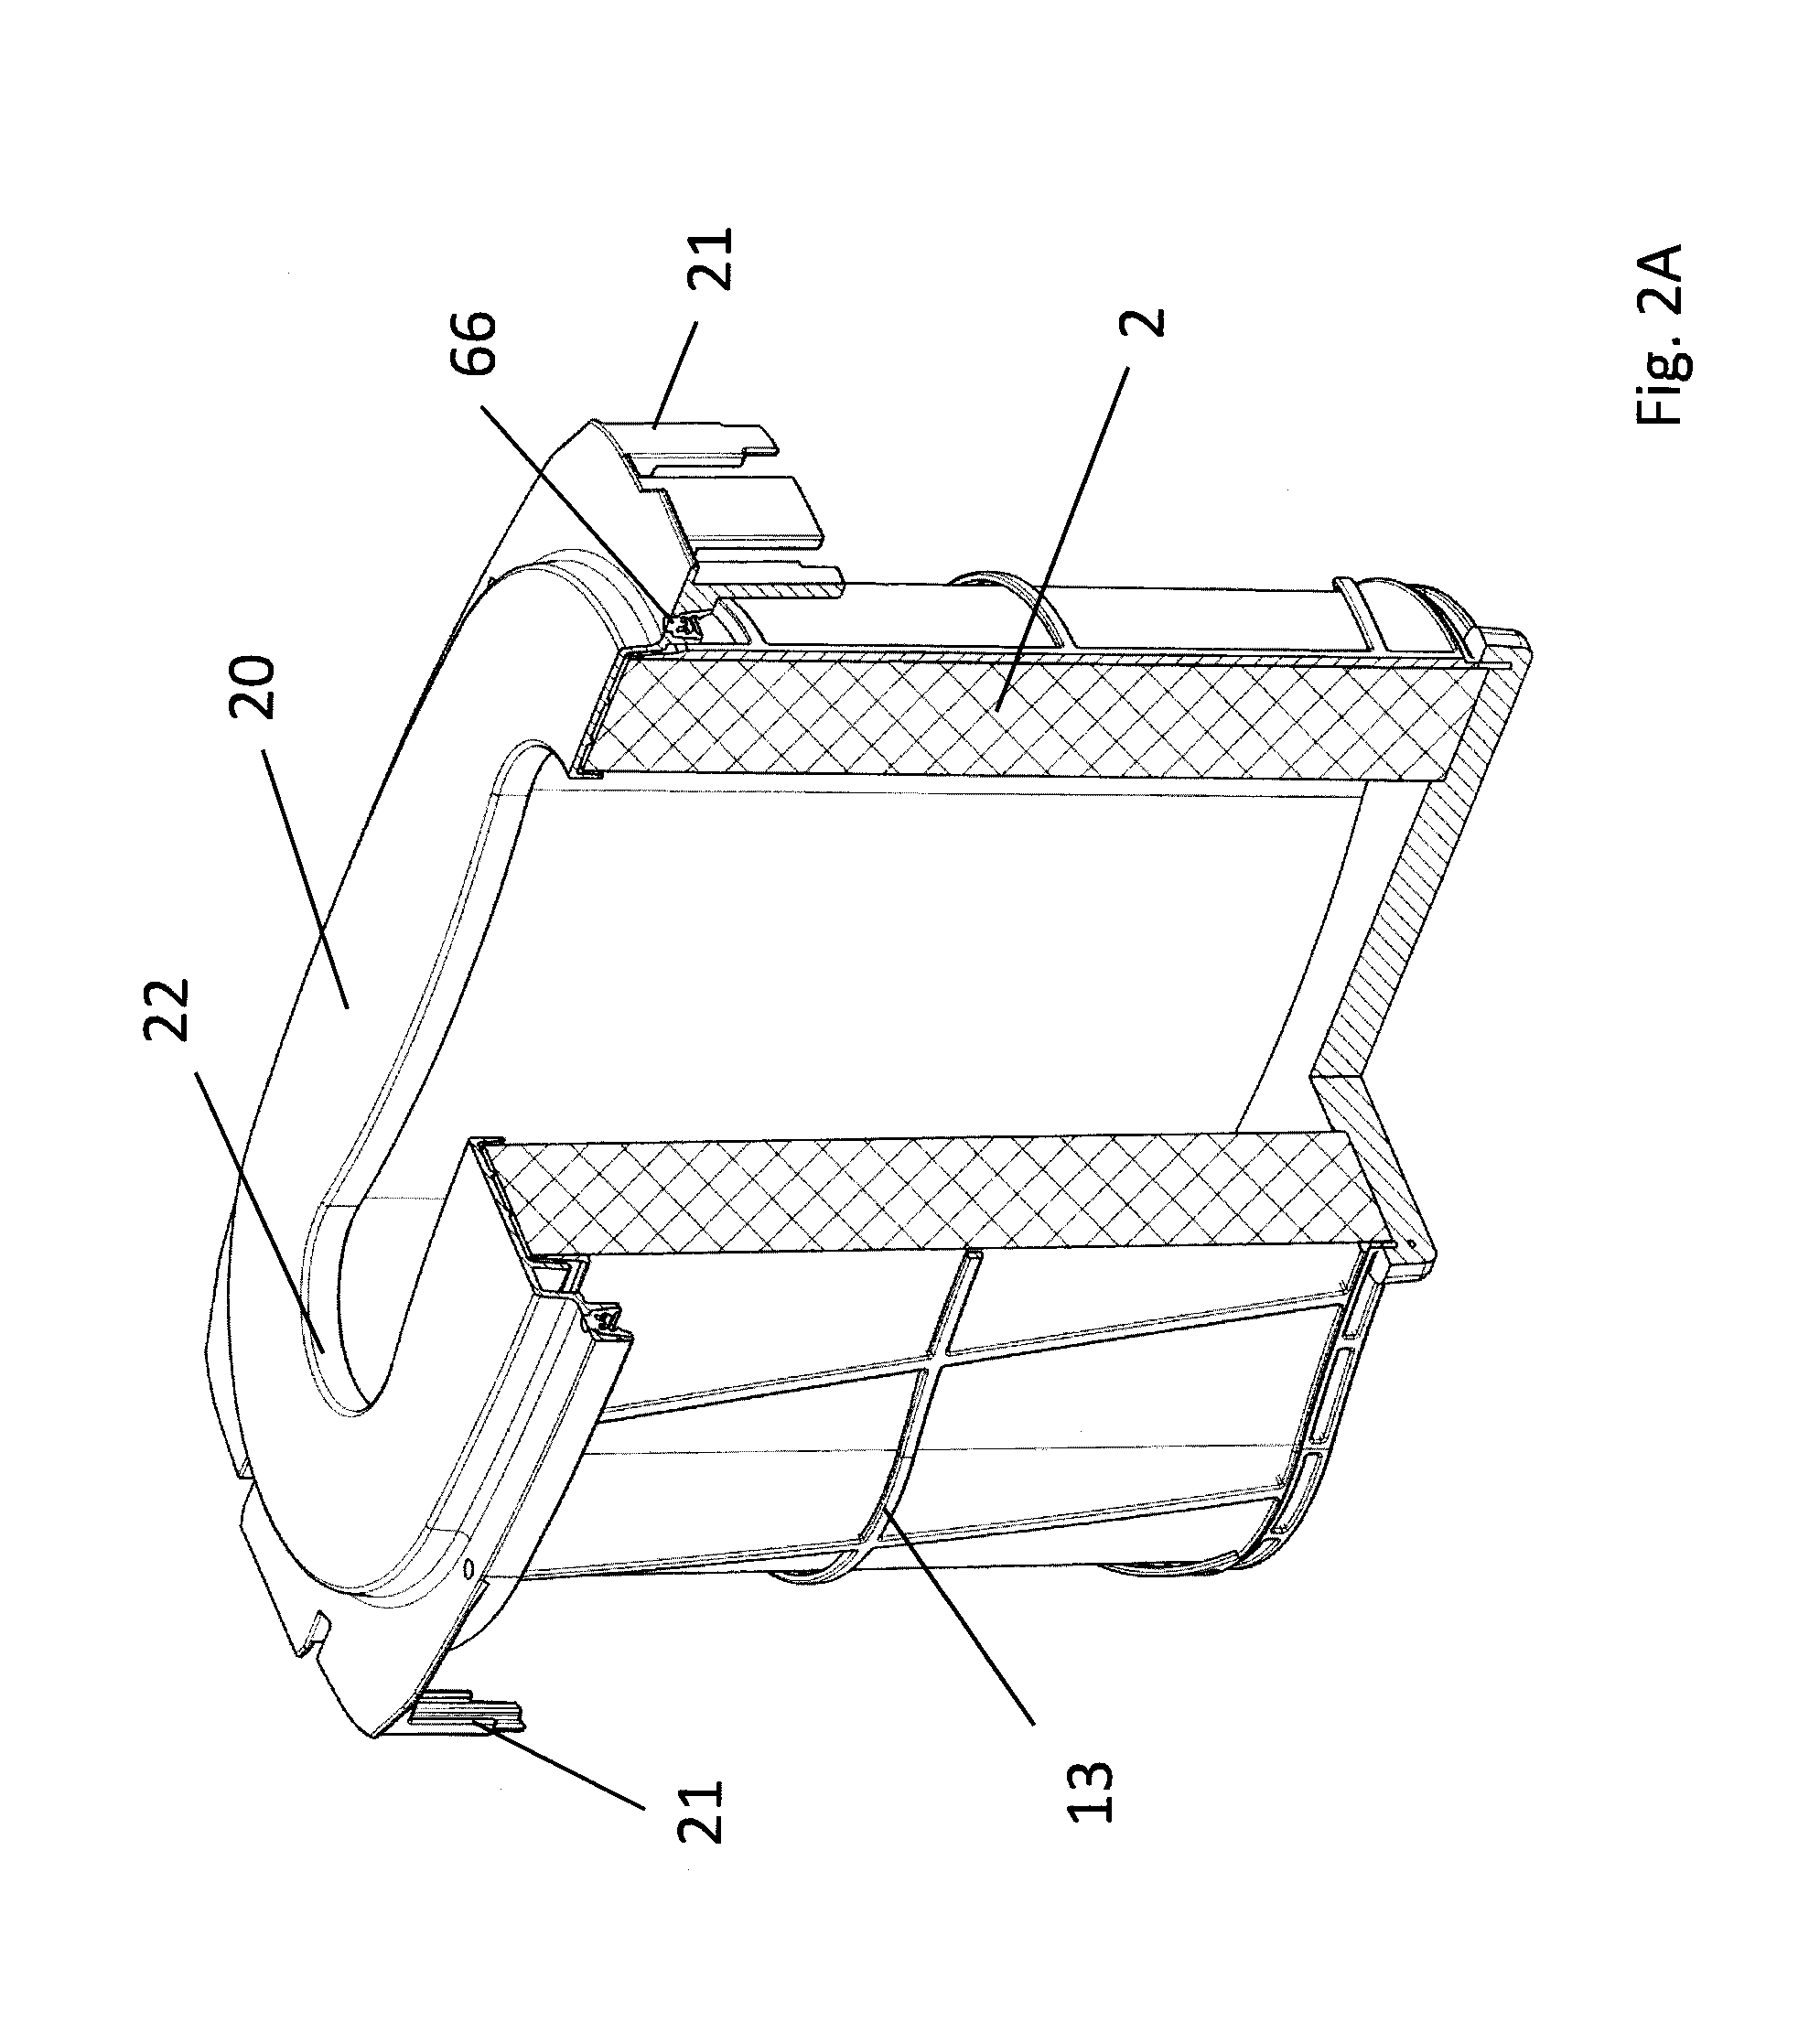 Air filter element, air filter housing and air filter system